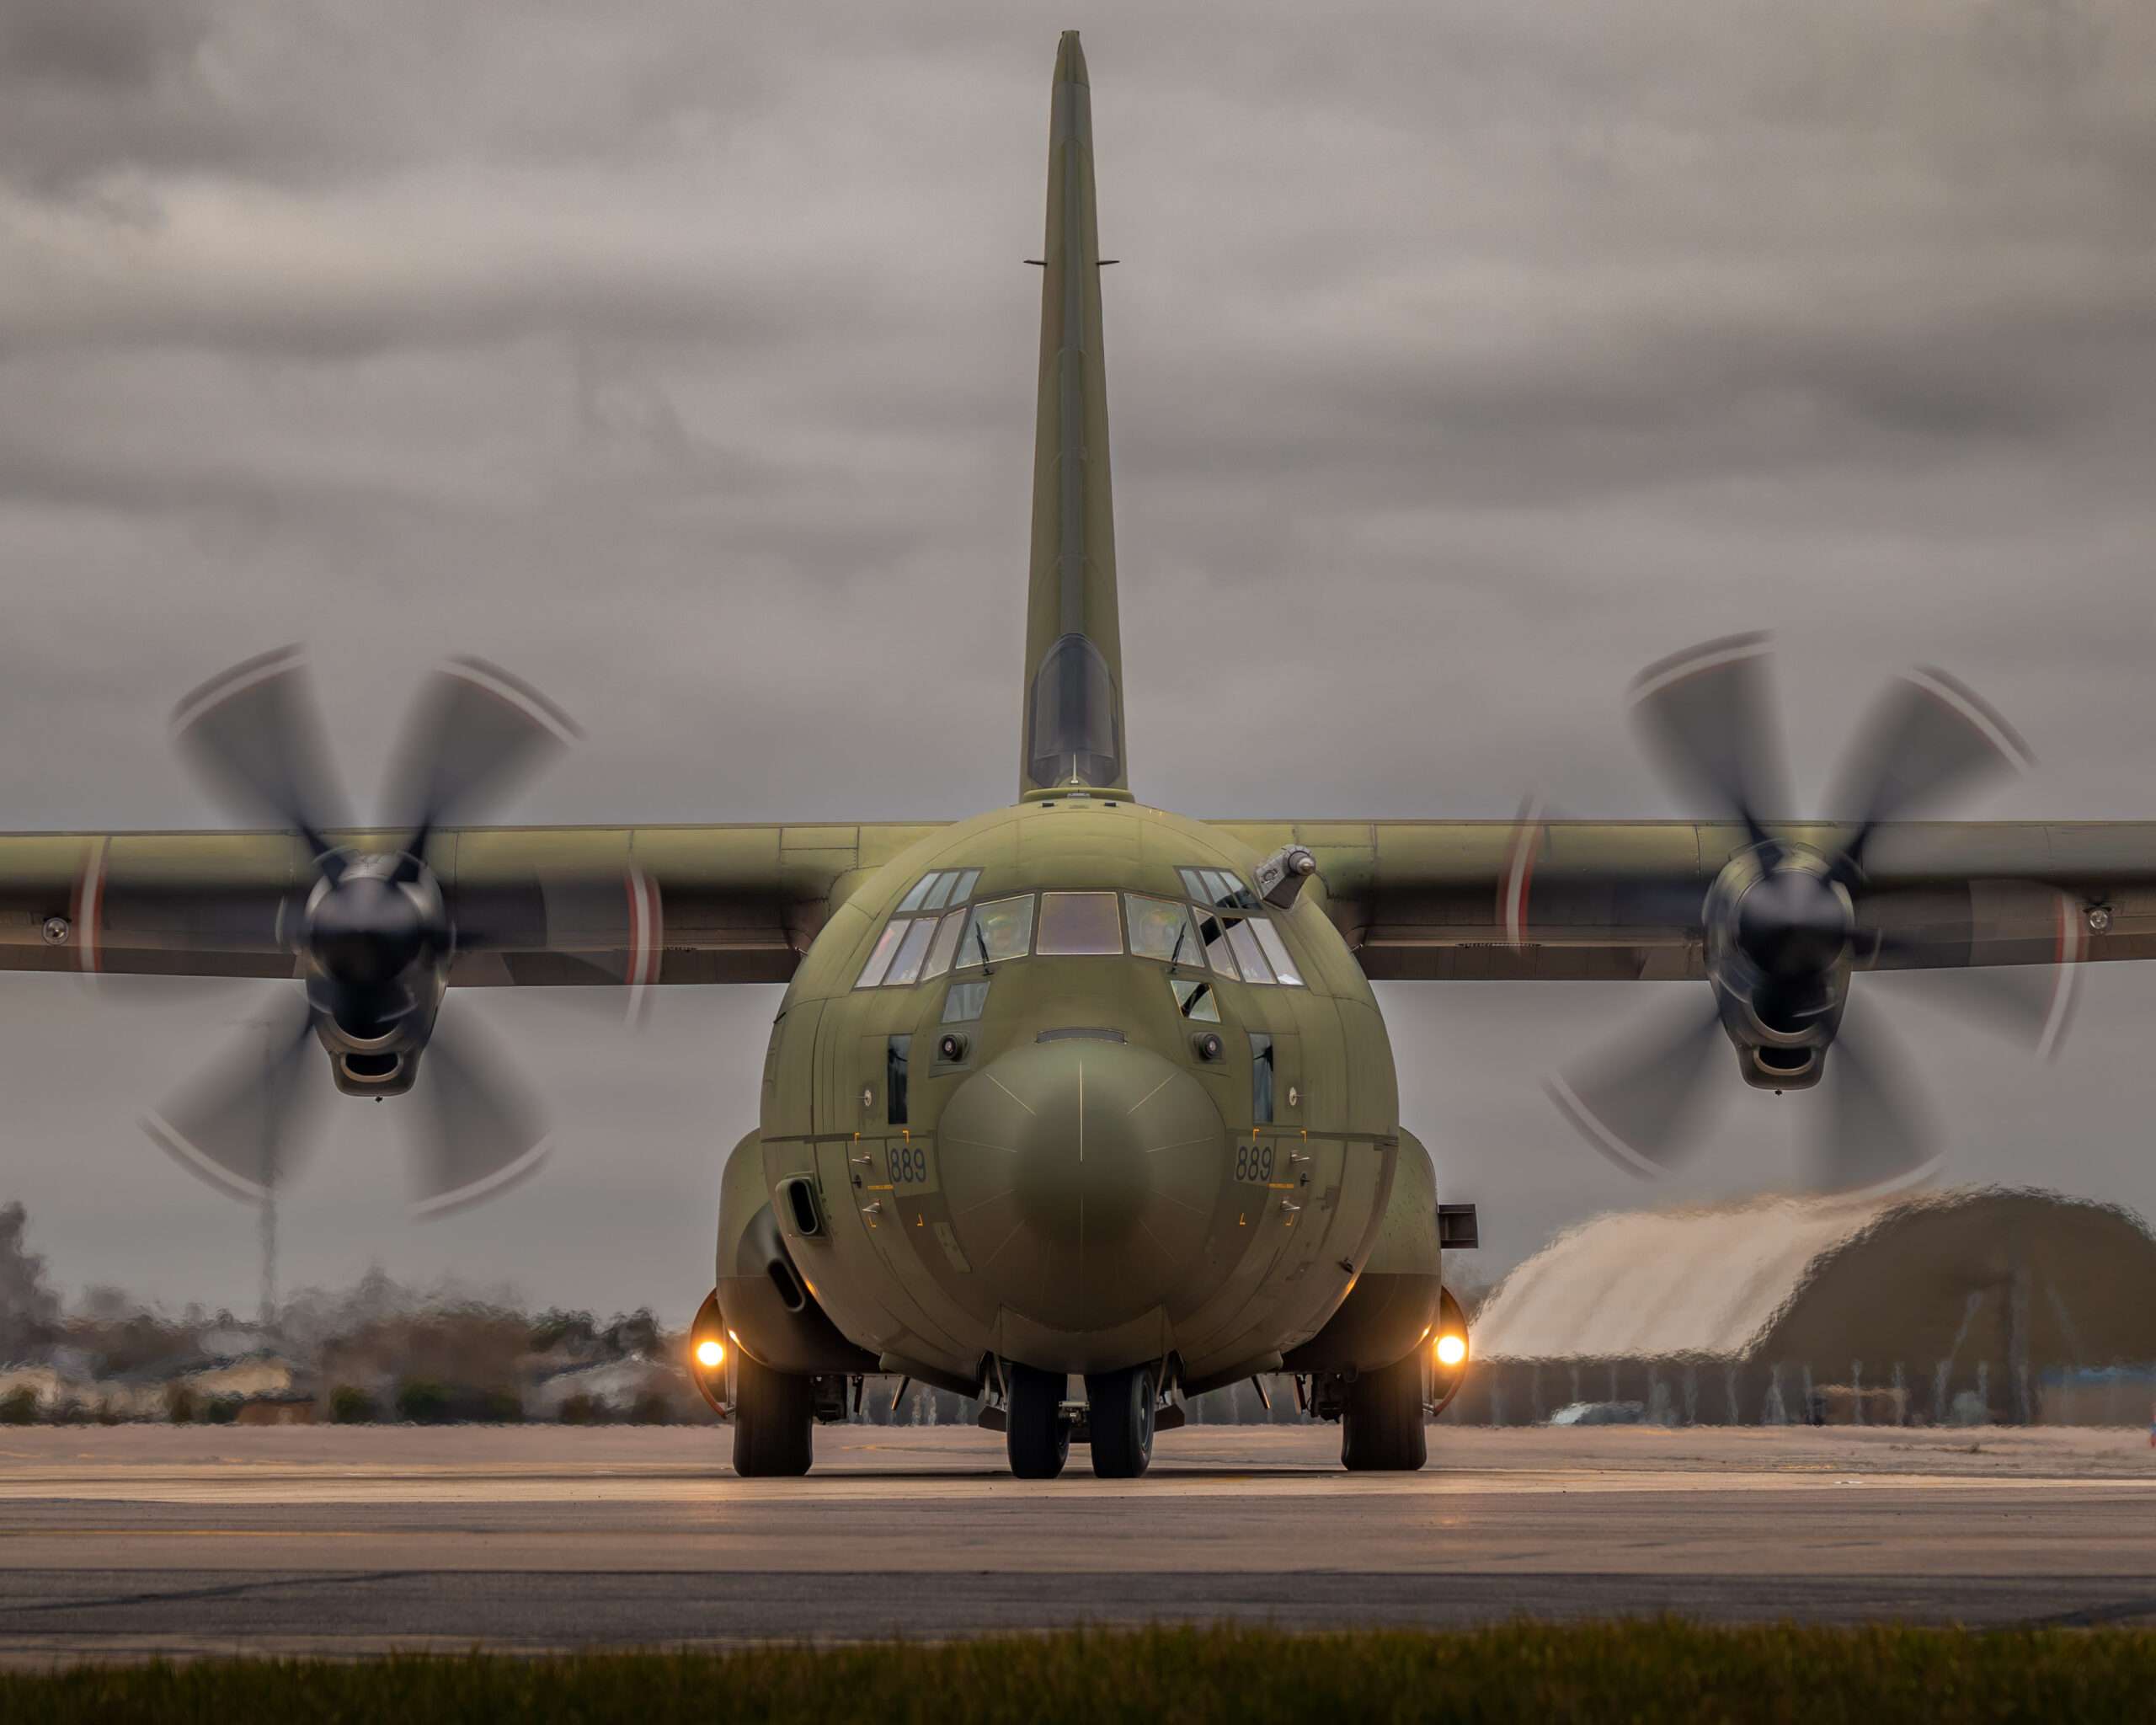 A C-130 Hercules view from the front.